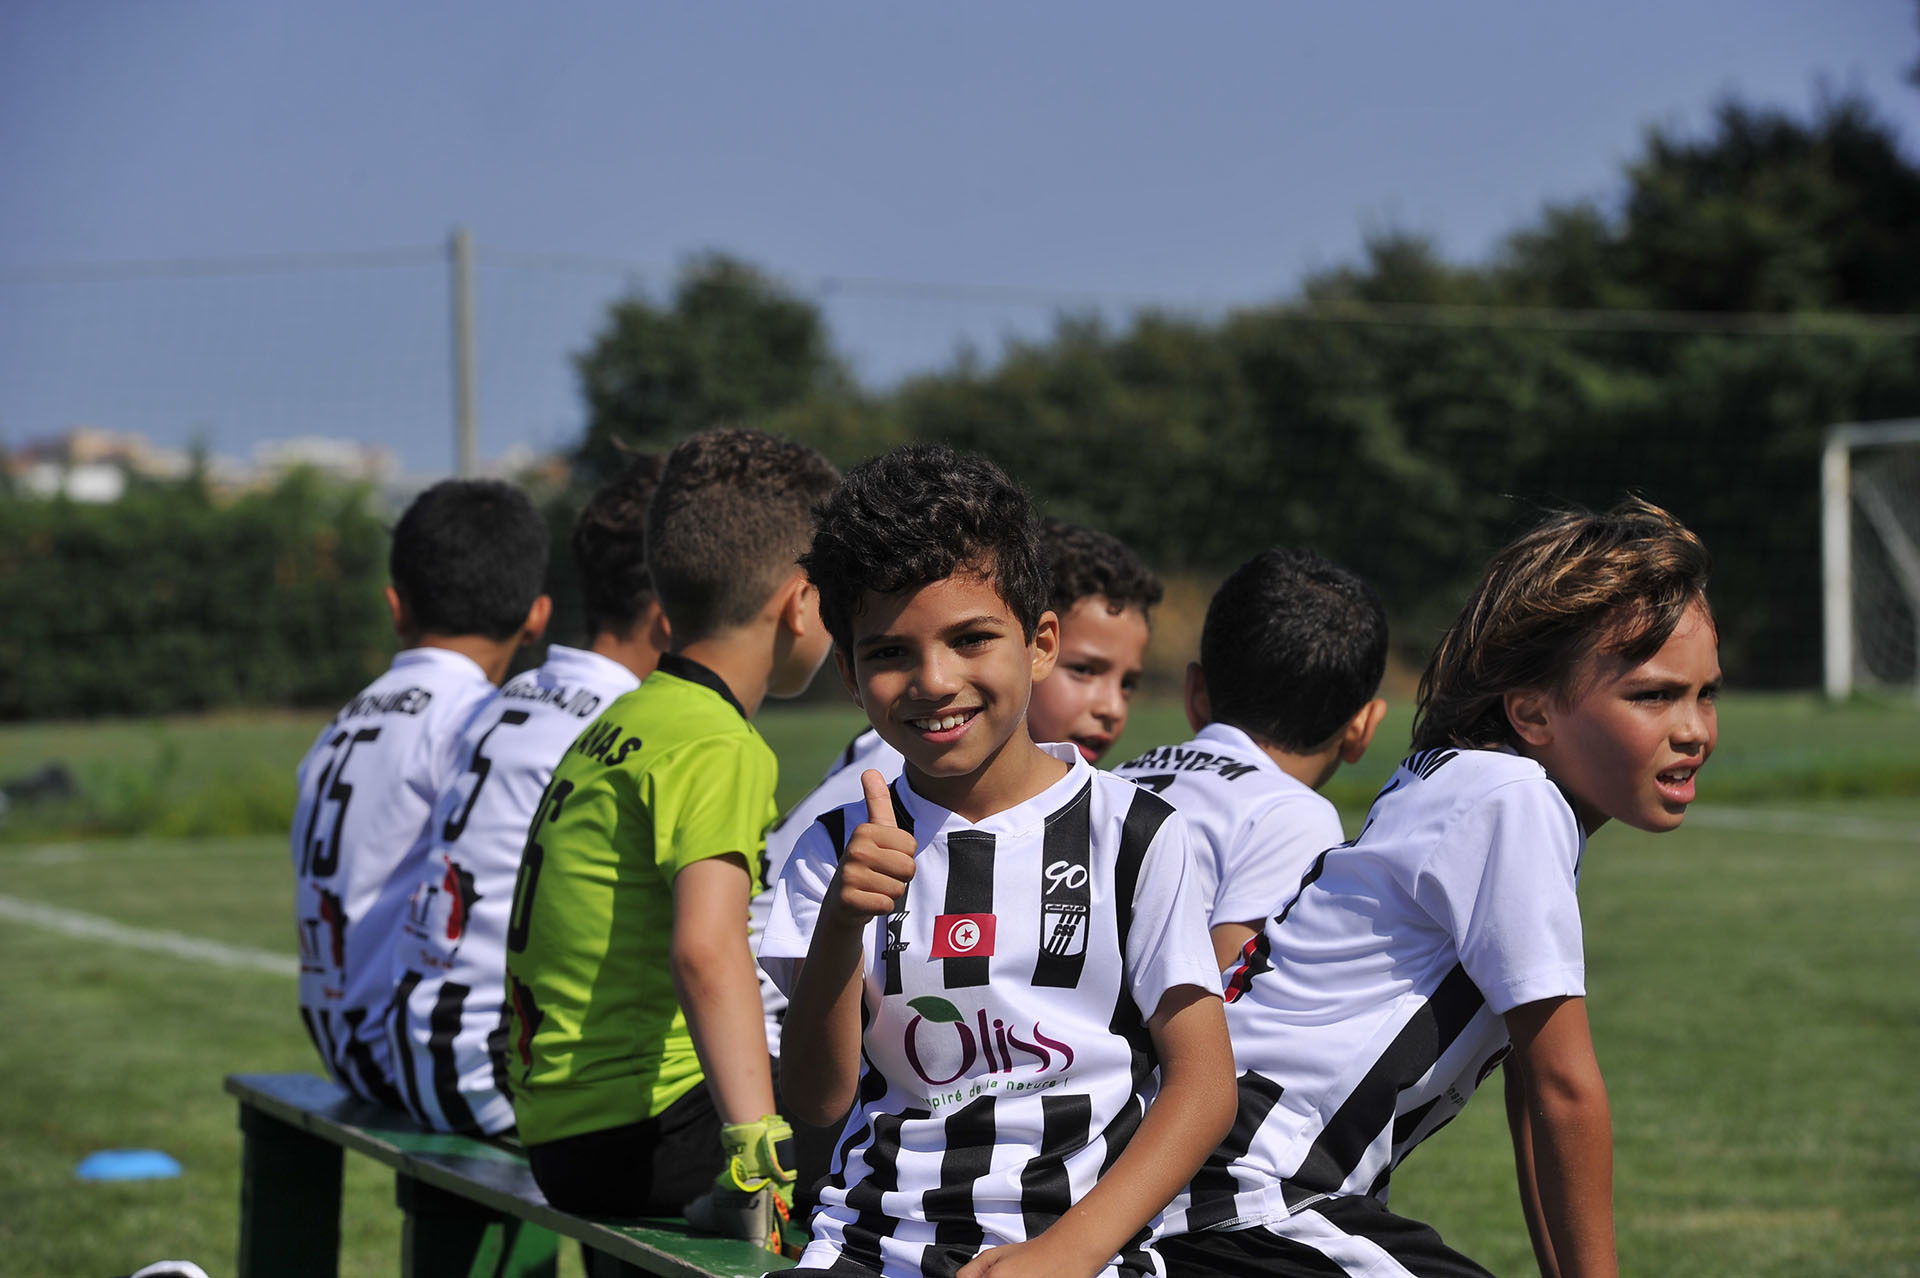 IberCup Barcelona - happy players - Road to Sport